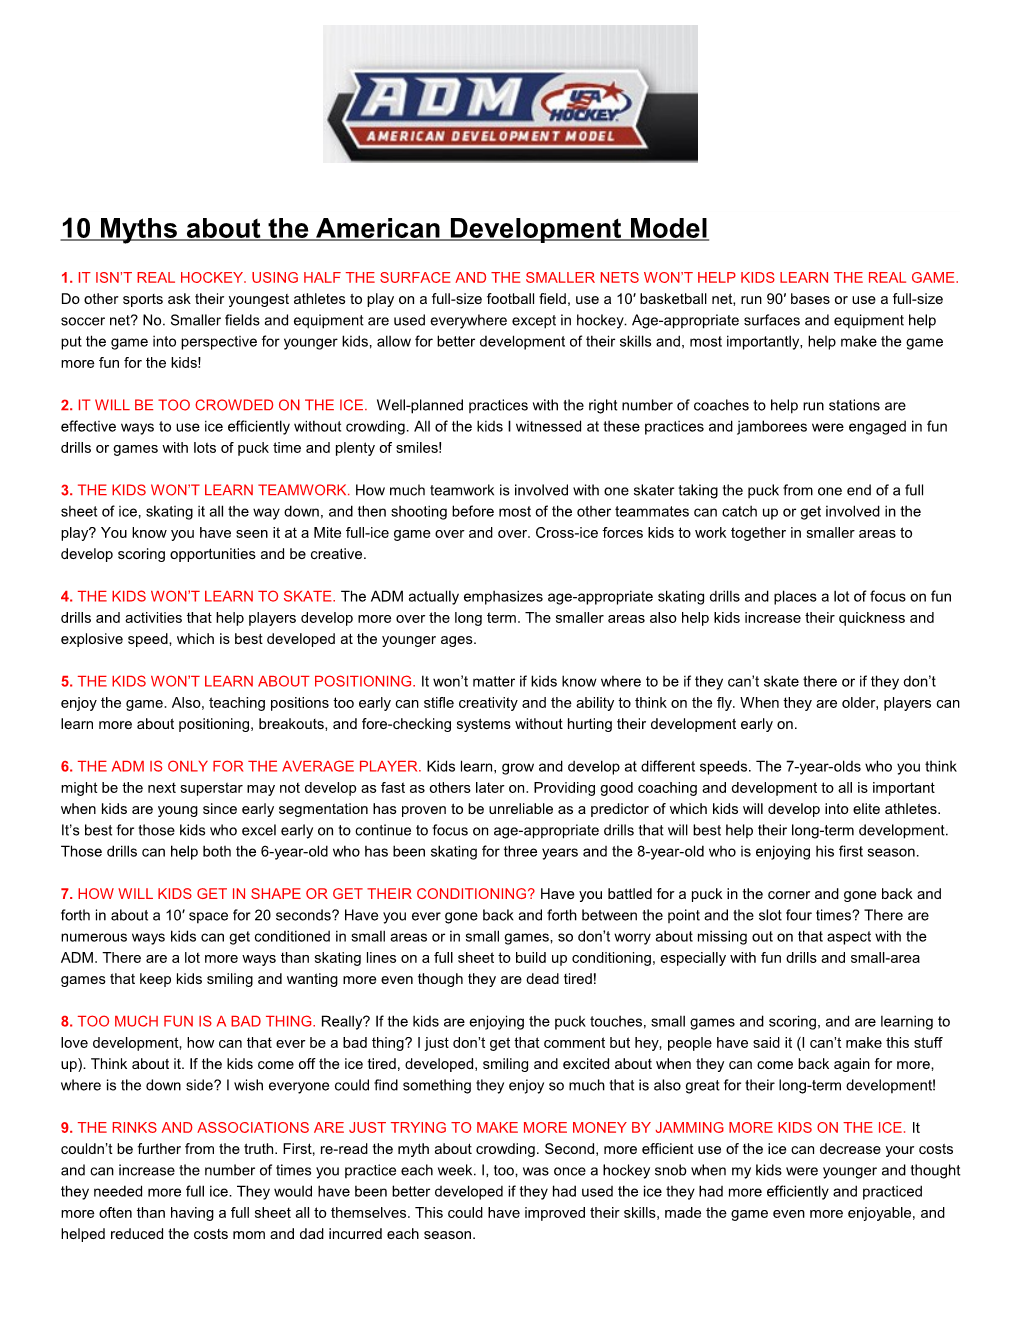 10 Myths About the American Development Model